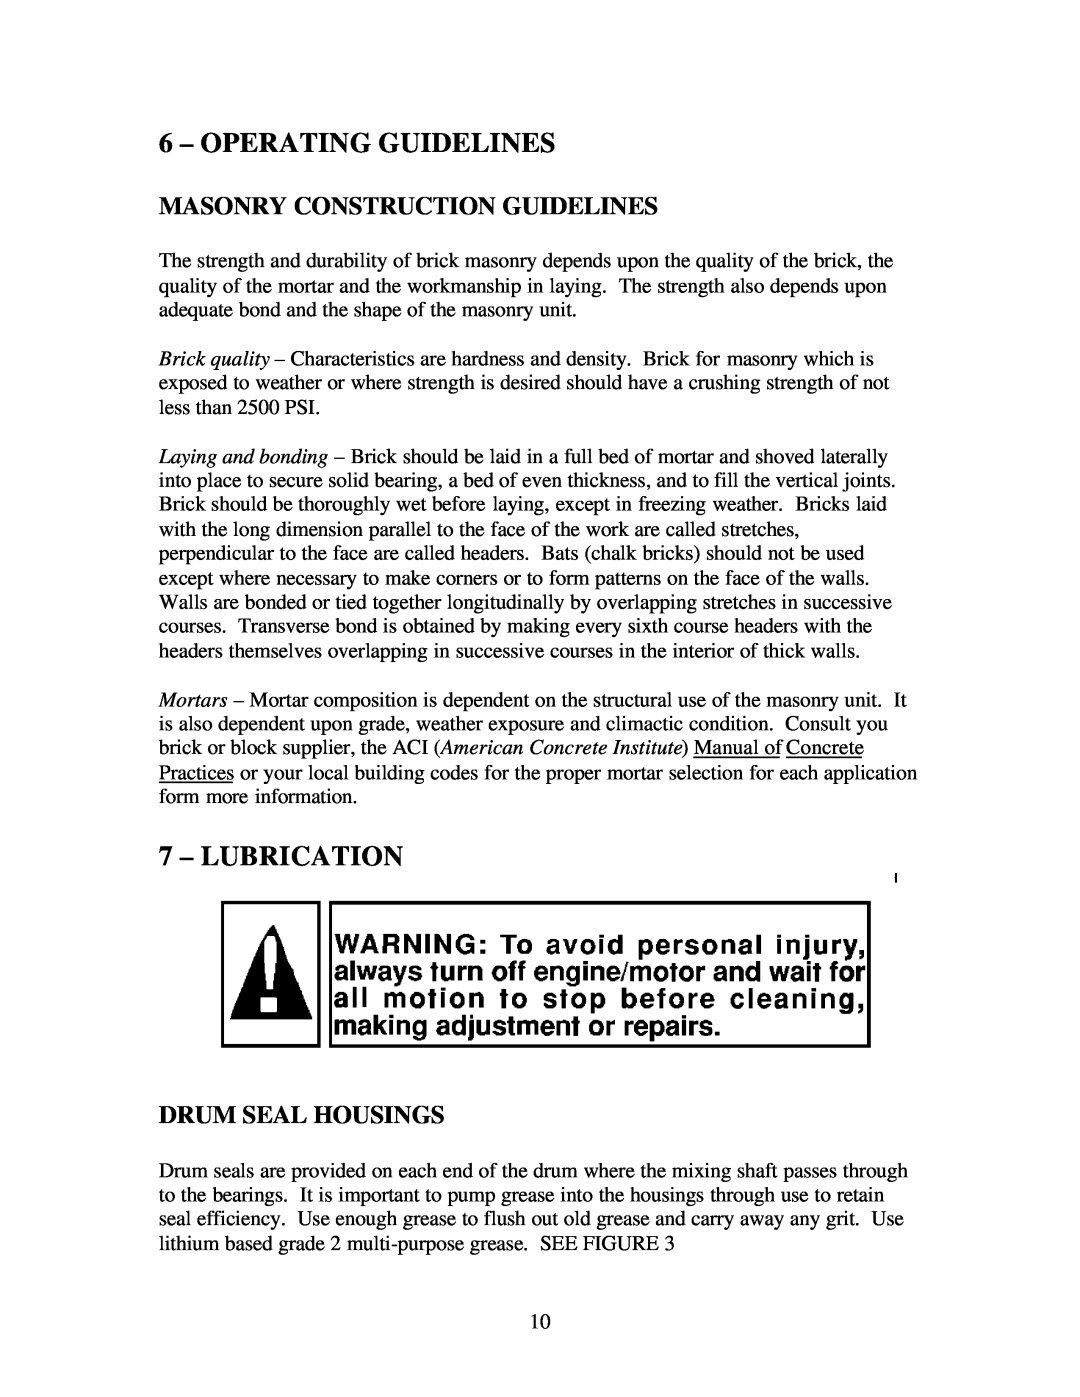 Gilson 600MP manual Operating Guidelines, Lubrication, Masonry Construction Guidelines, Drum Seal Housings 